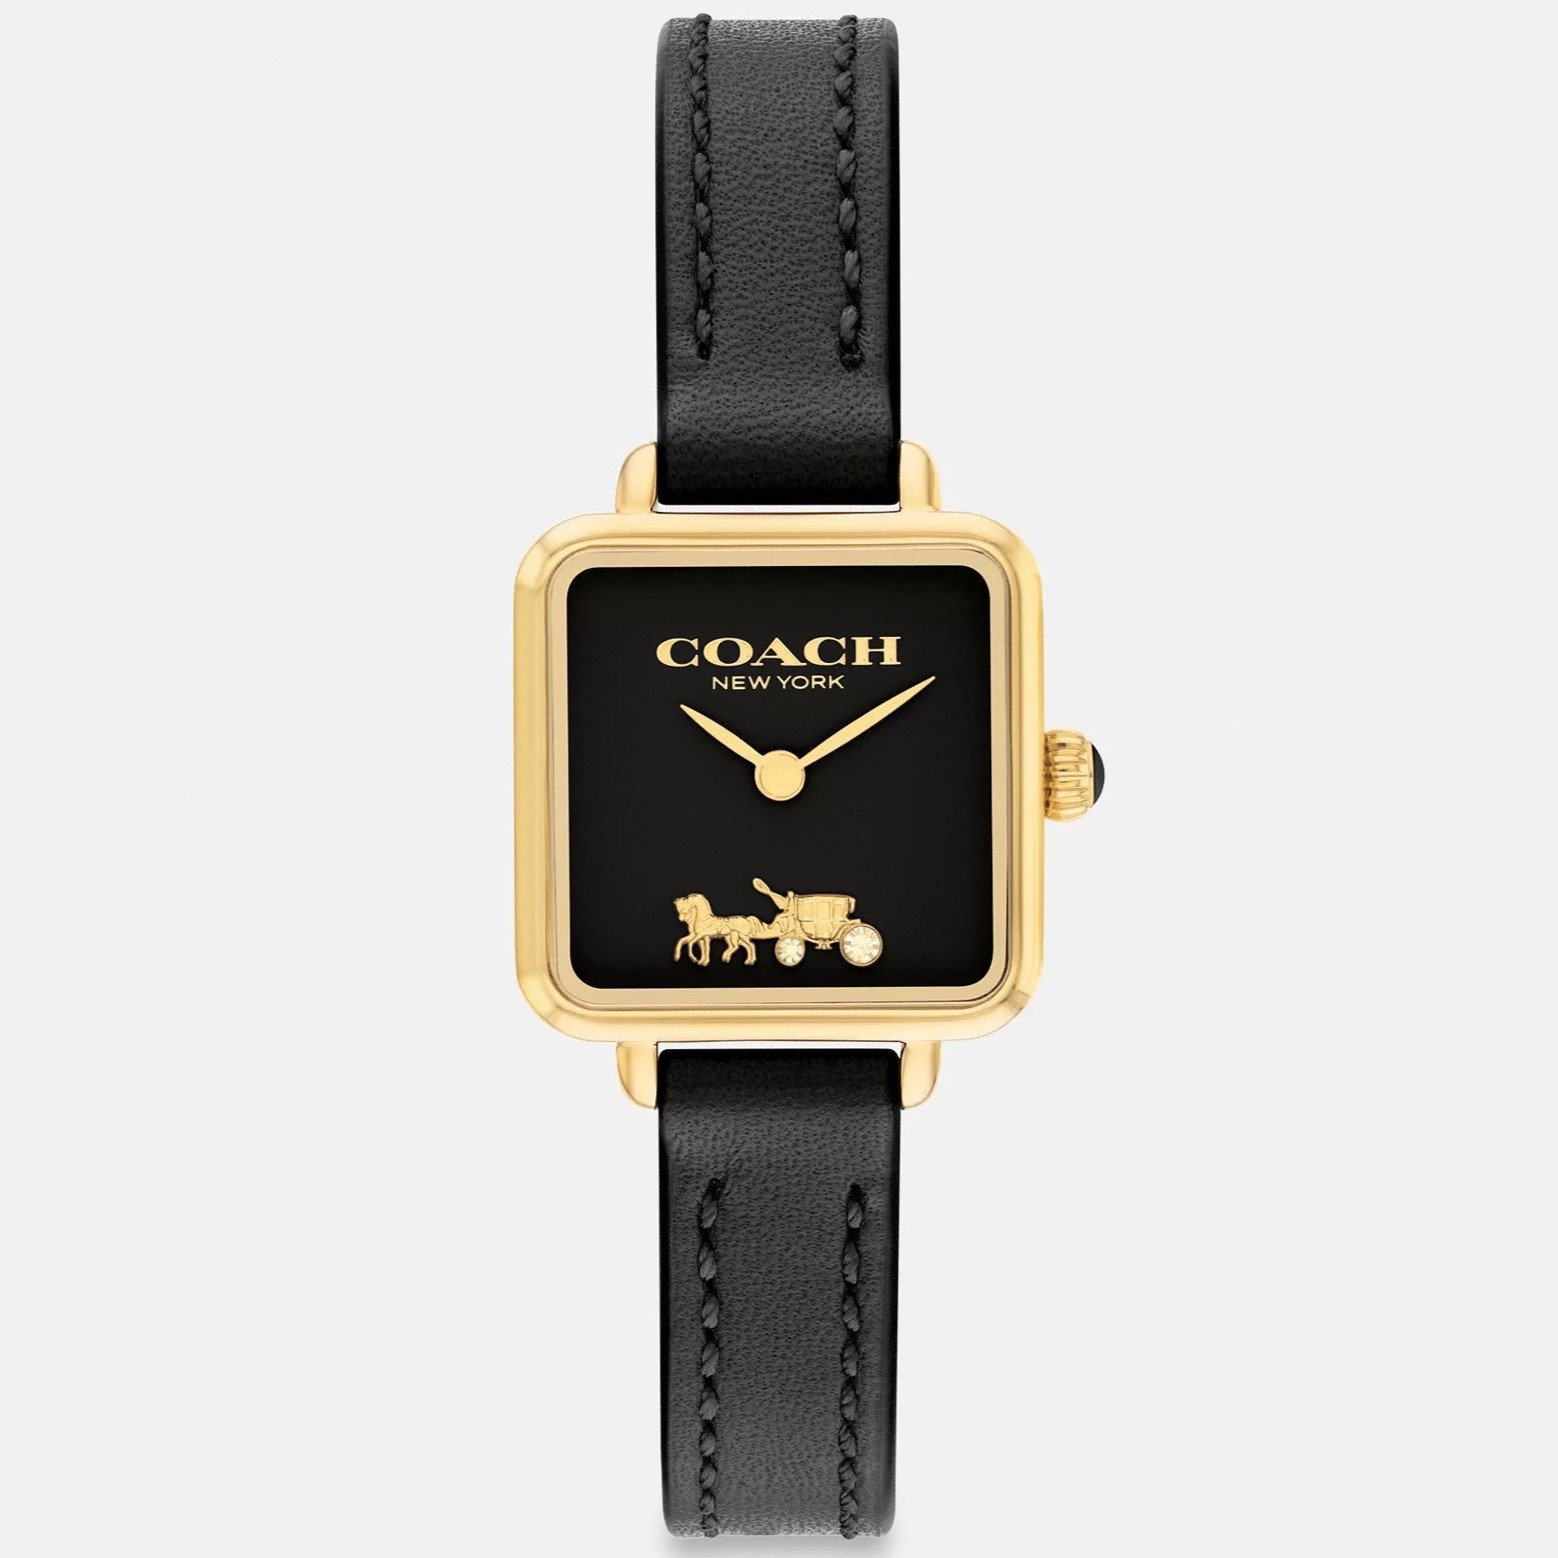 ĐỒNG HỒ NỮ DÂY DA ĐEN COACH CASS SIGNATURE HORSE AND CARRIAGE ION-PLATED GOLDTONE STEEL AND BLACK LEATHER STRAP WATCH 14504225 4